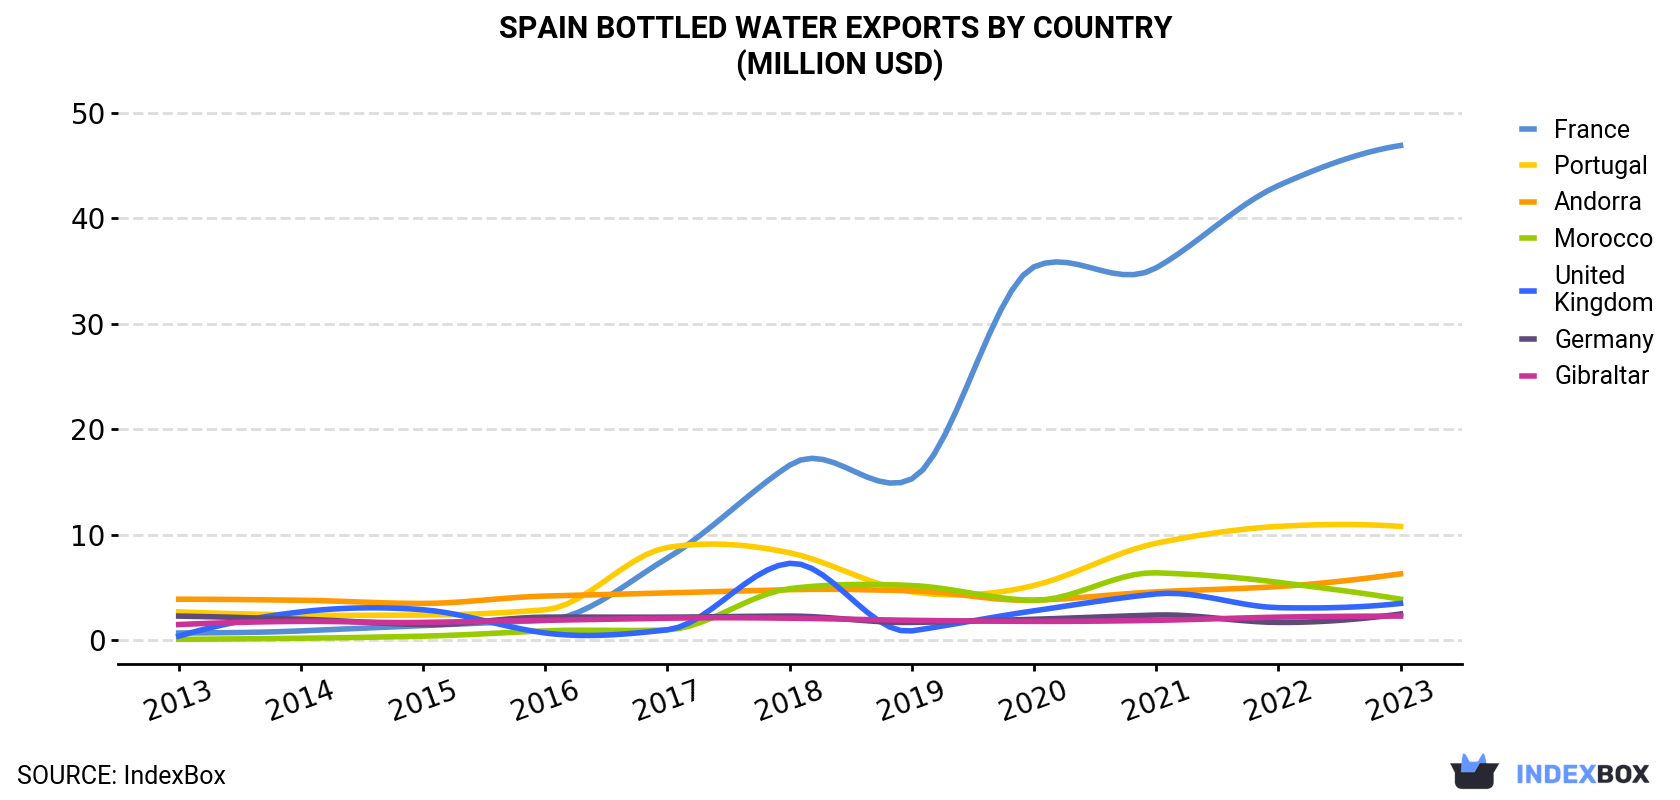 Spain Bottled Water Exports By Country (Million USD)